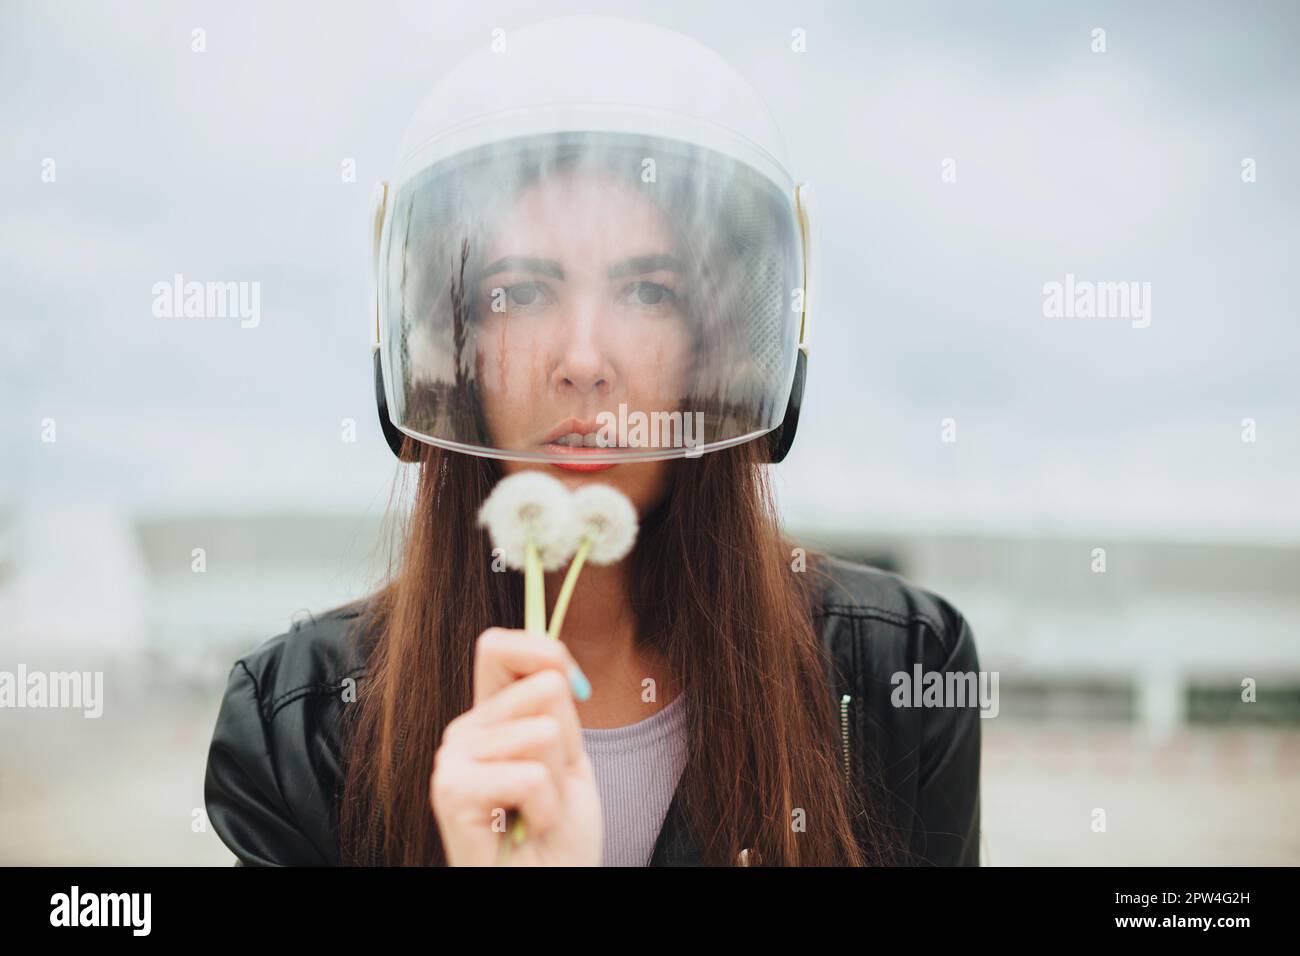 Outdoor portrait of young beautiful woman biker in bike safety helmet and leather outfit with dandelions flowers in hands looking at camera, female Stock Photo